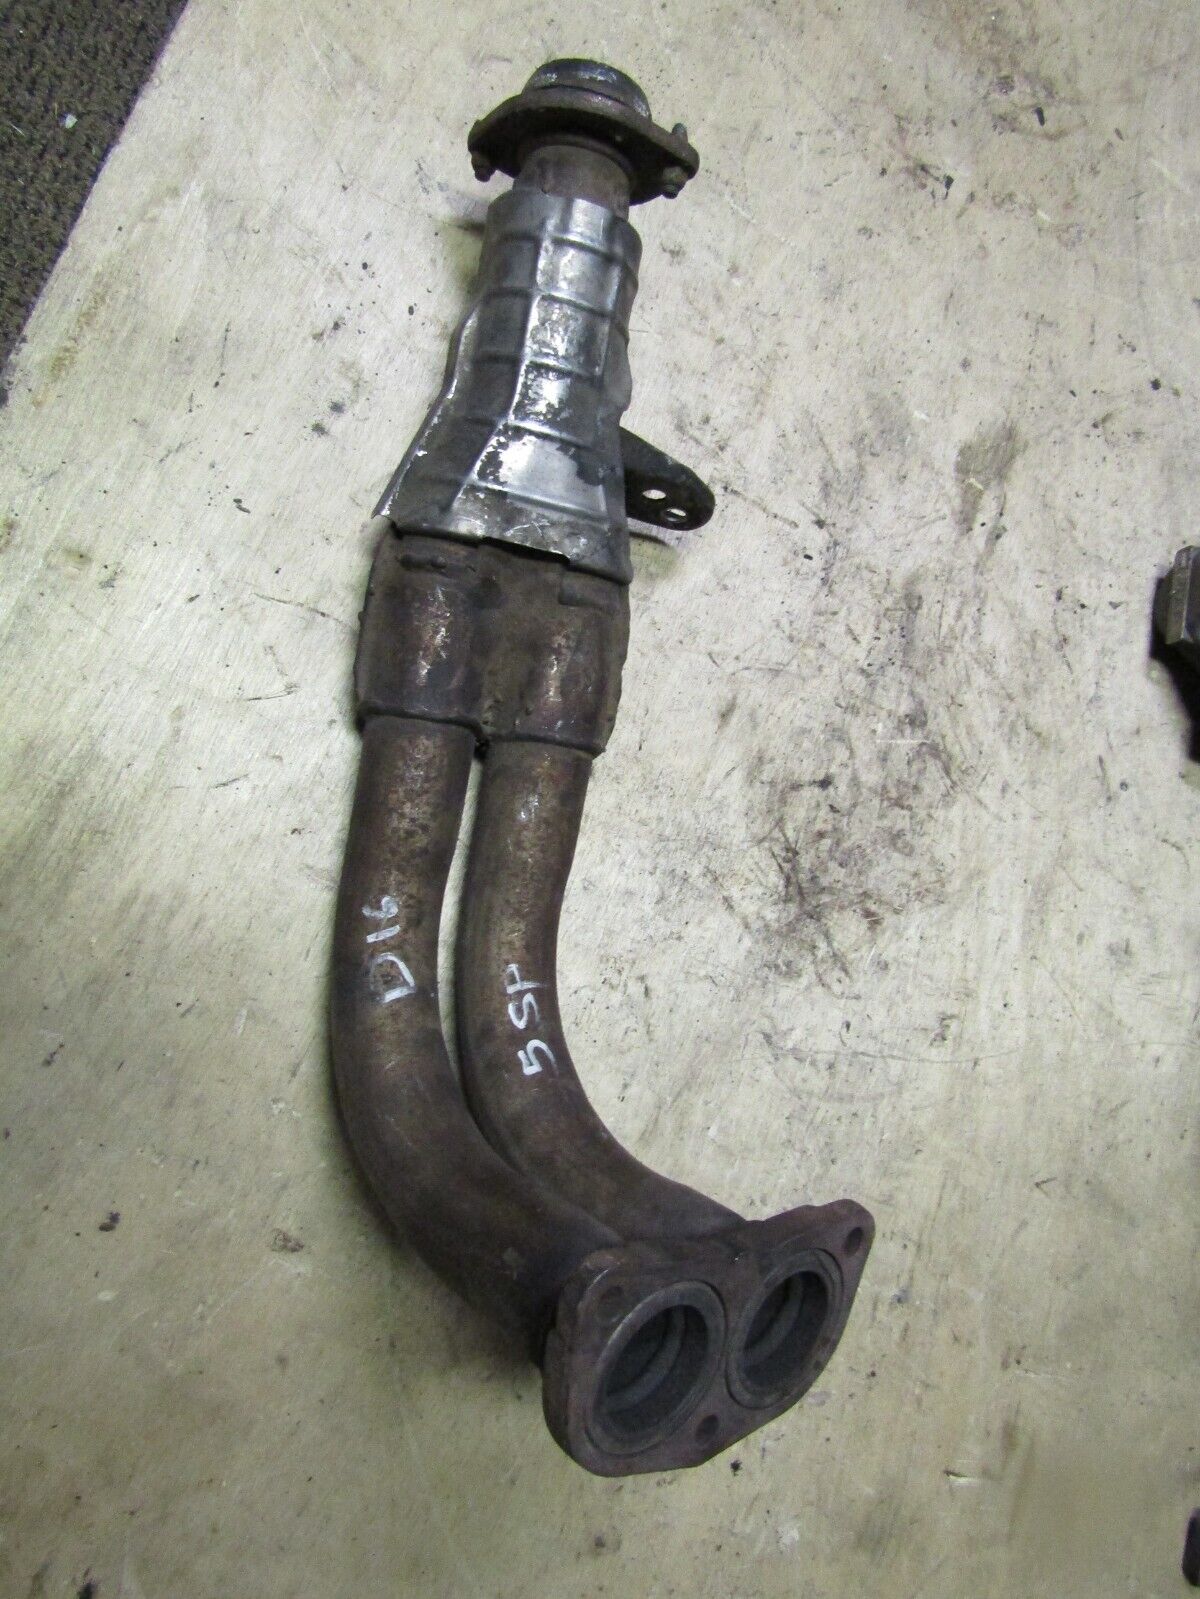 JDM Honda Civic D16 downpipe with M/T manual transmission